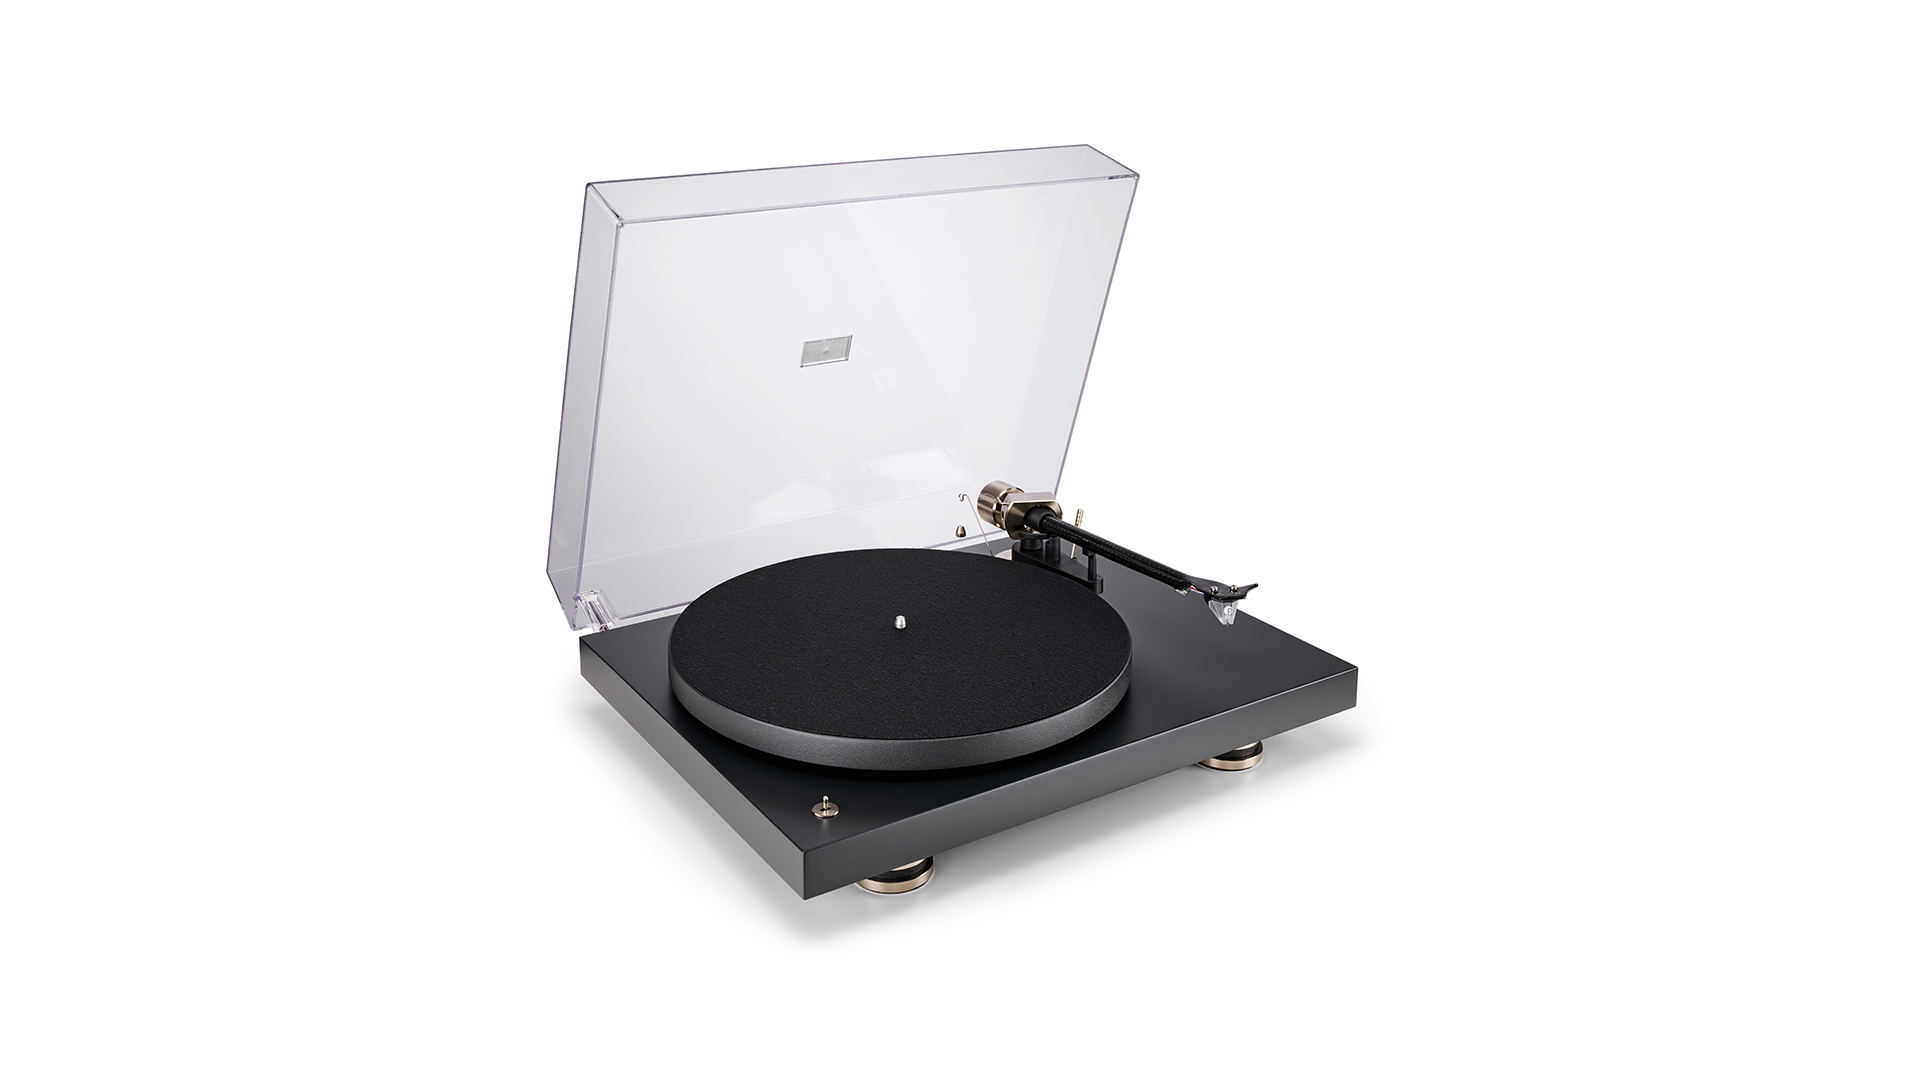 Pro-Ject Debut Pro review: the most sophisticated Debut turntable yet